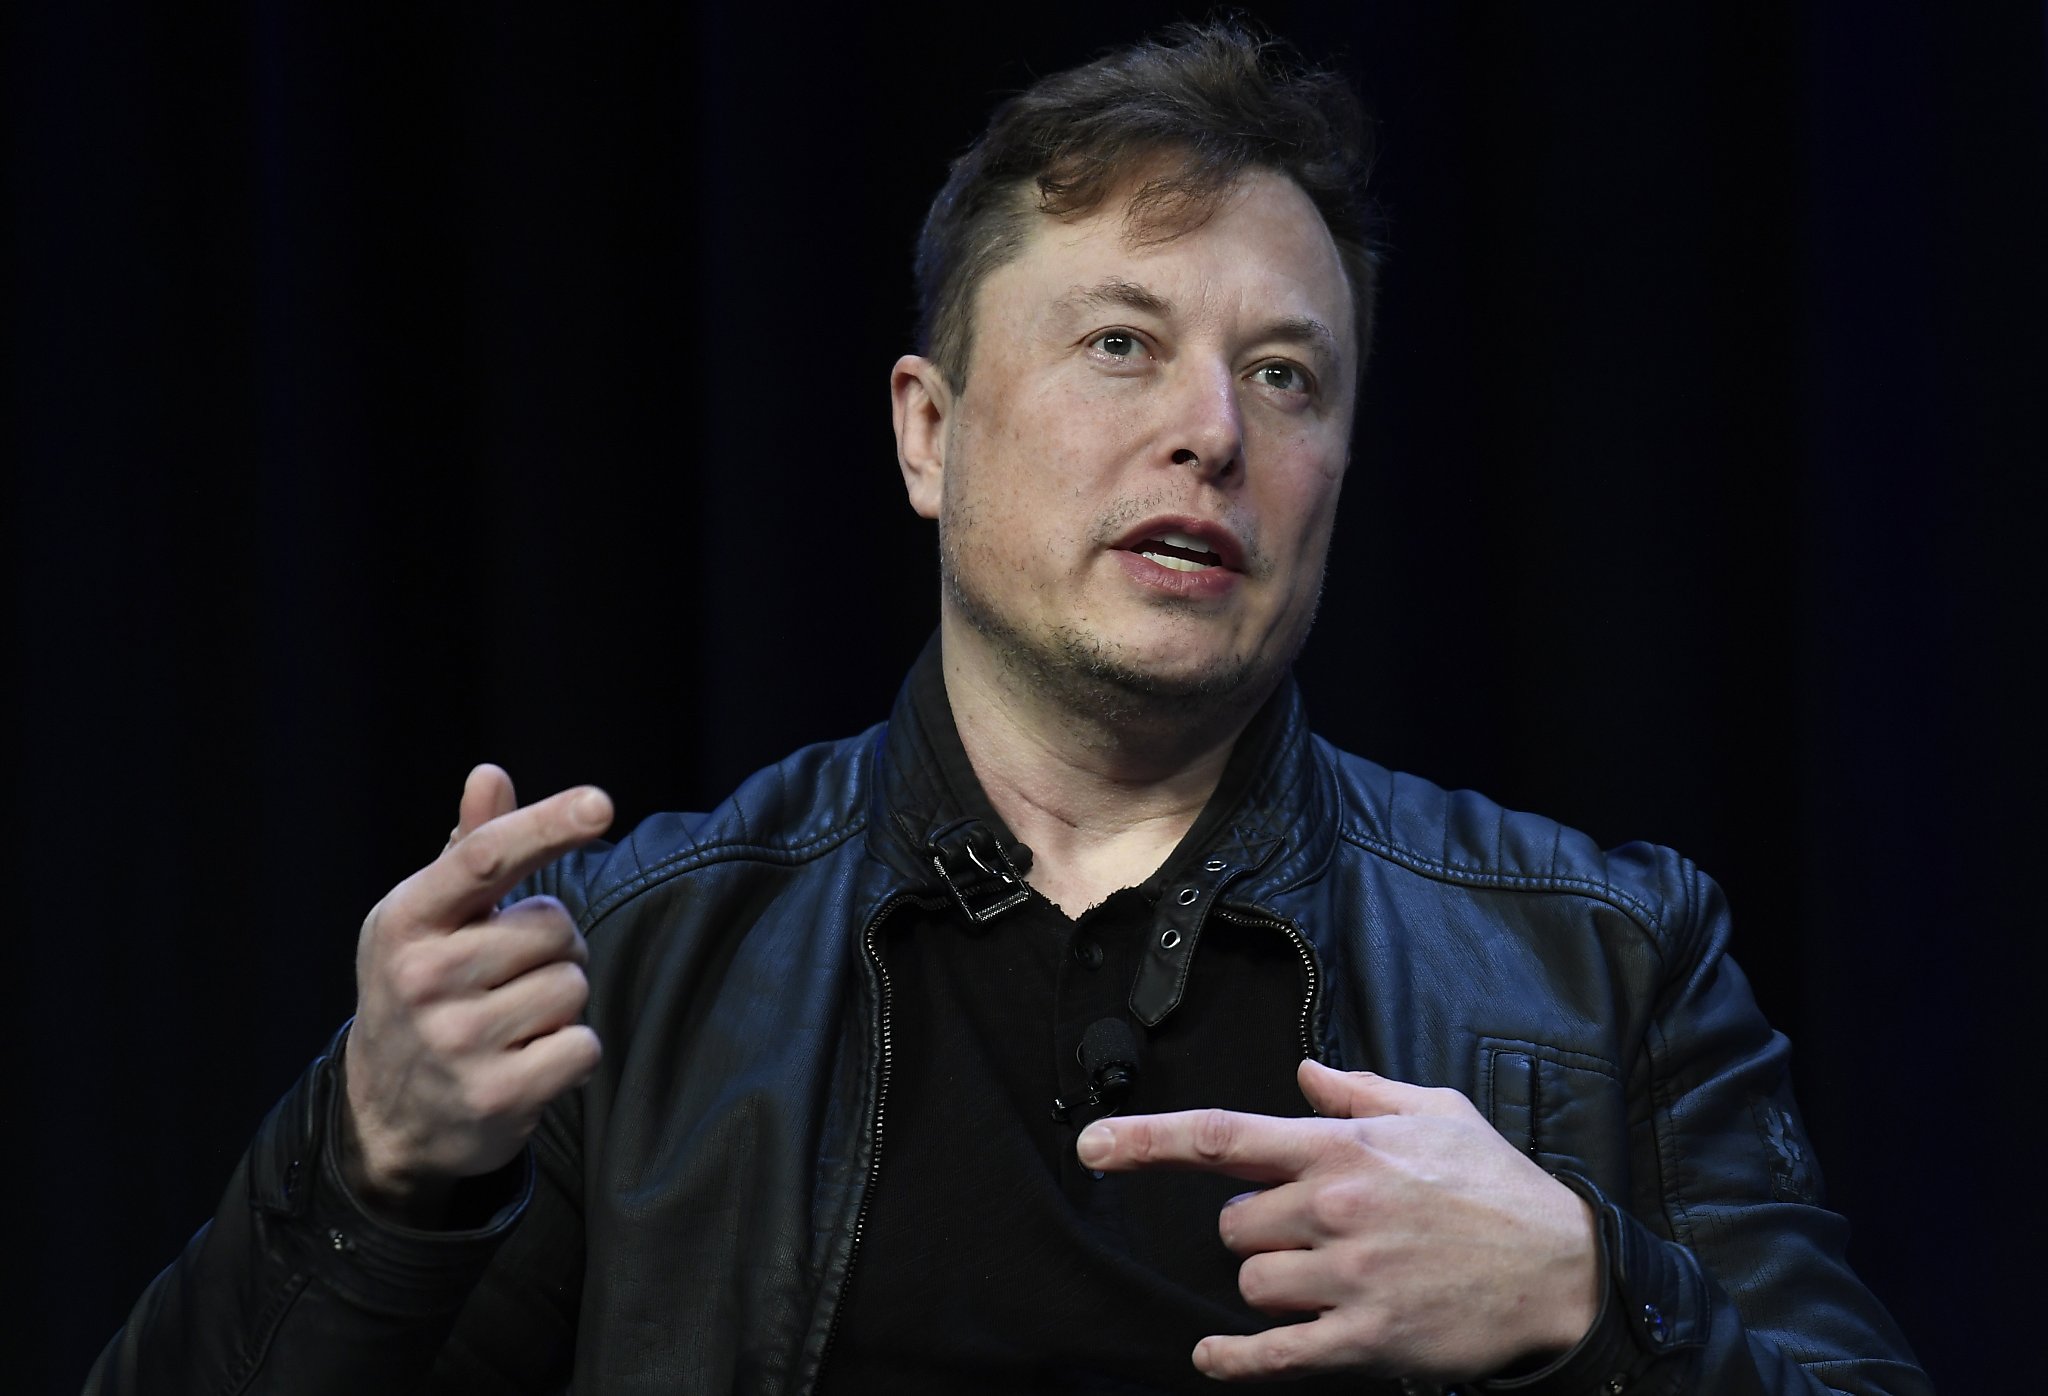 Elon Musk has no idea what doing with Twitter